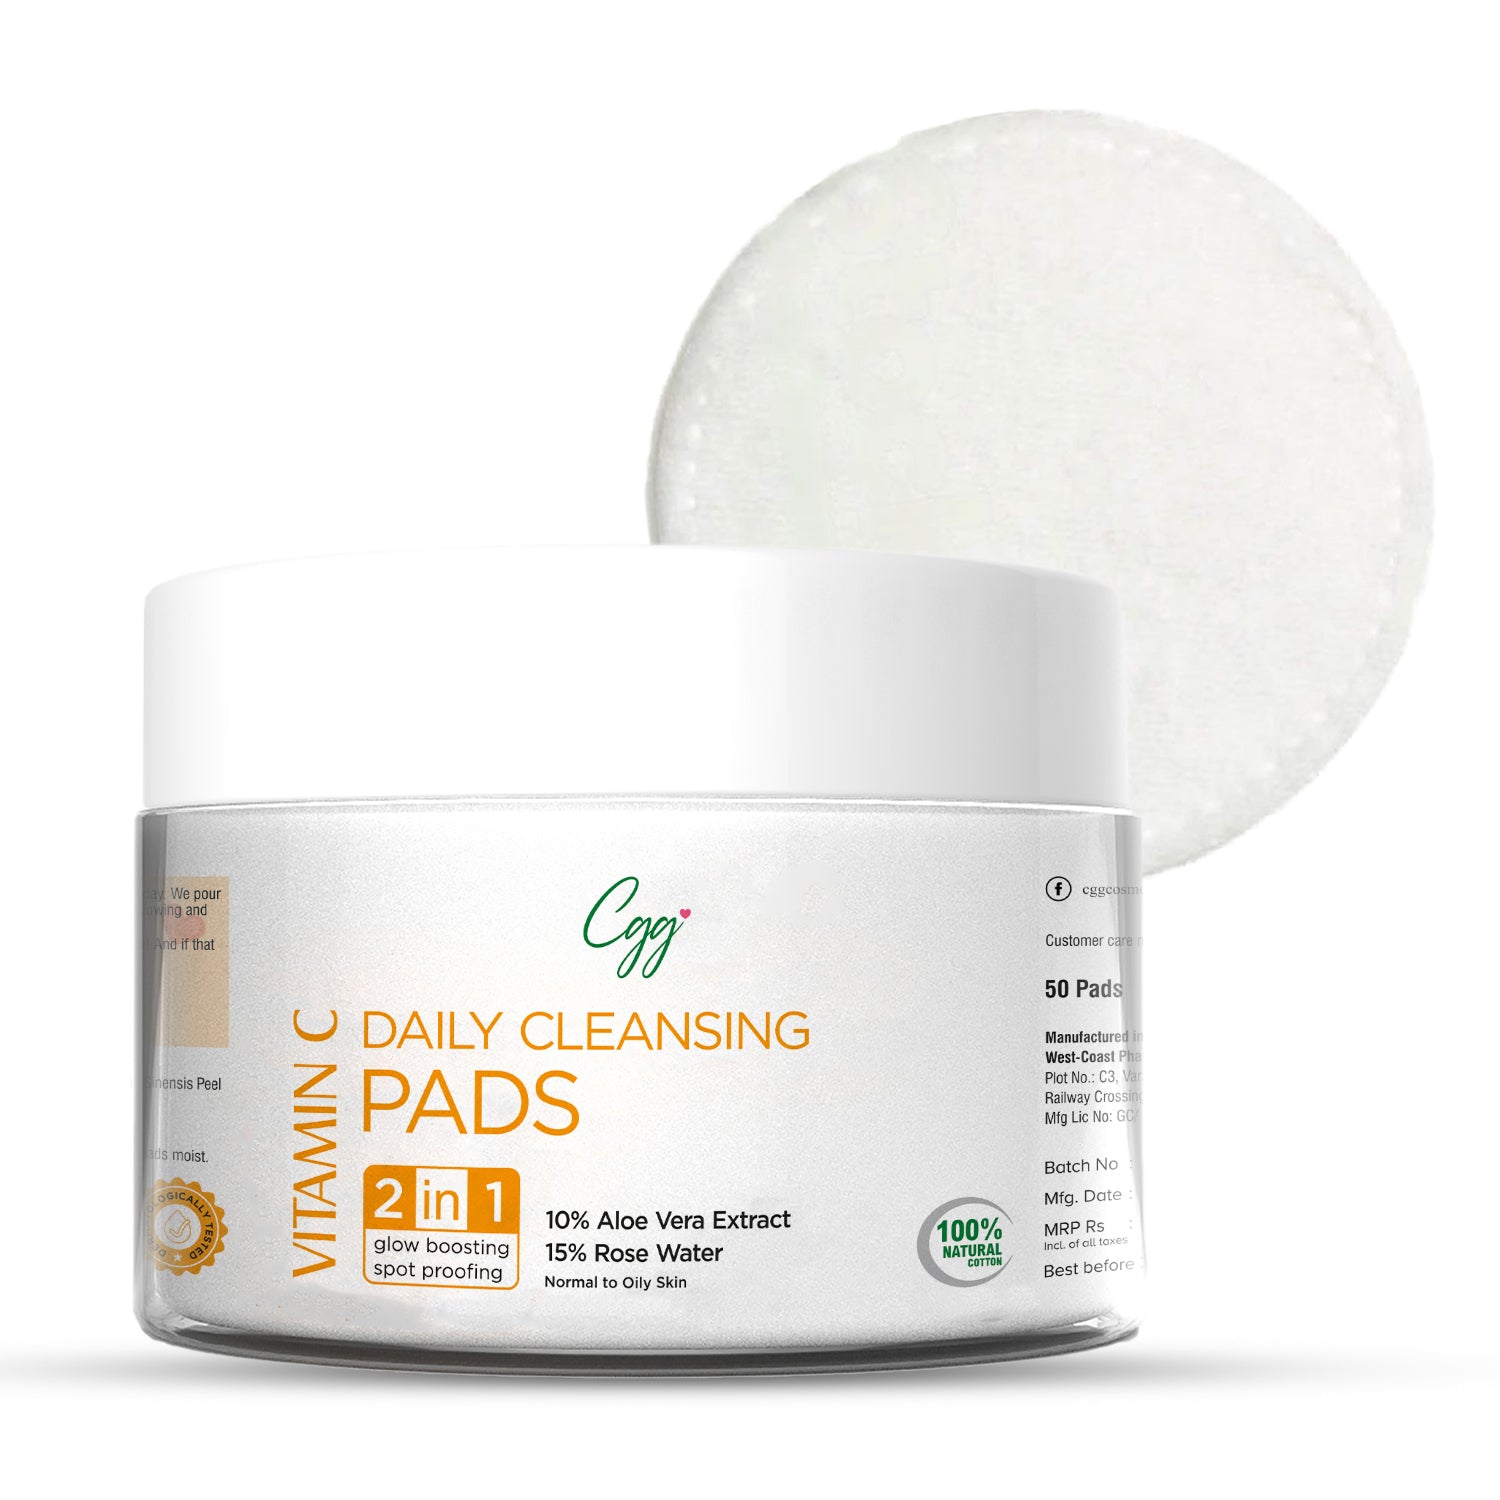 CGG Cosmetics Vitamin C Daily Cleansing Pads | 2 in 1 for Glow Boosting & Spot Proofing - 50pads